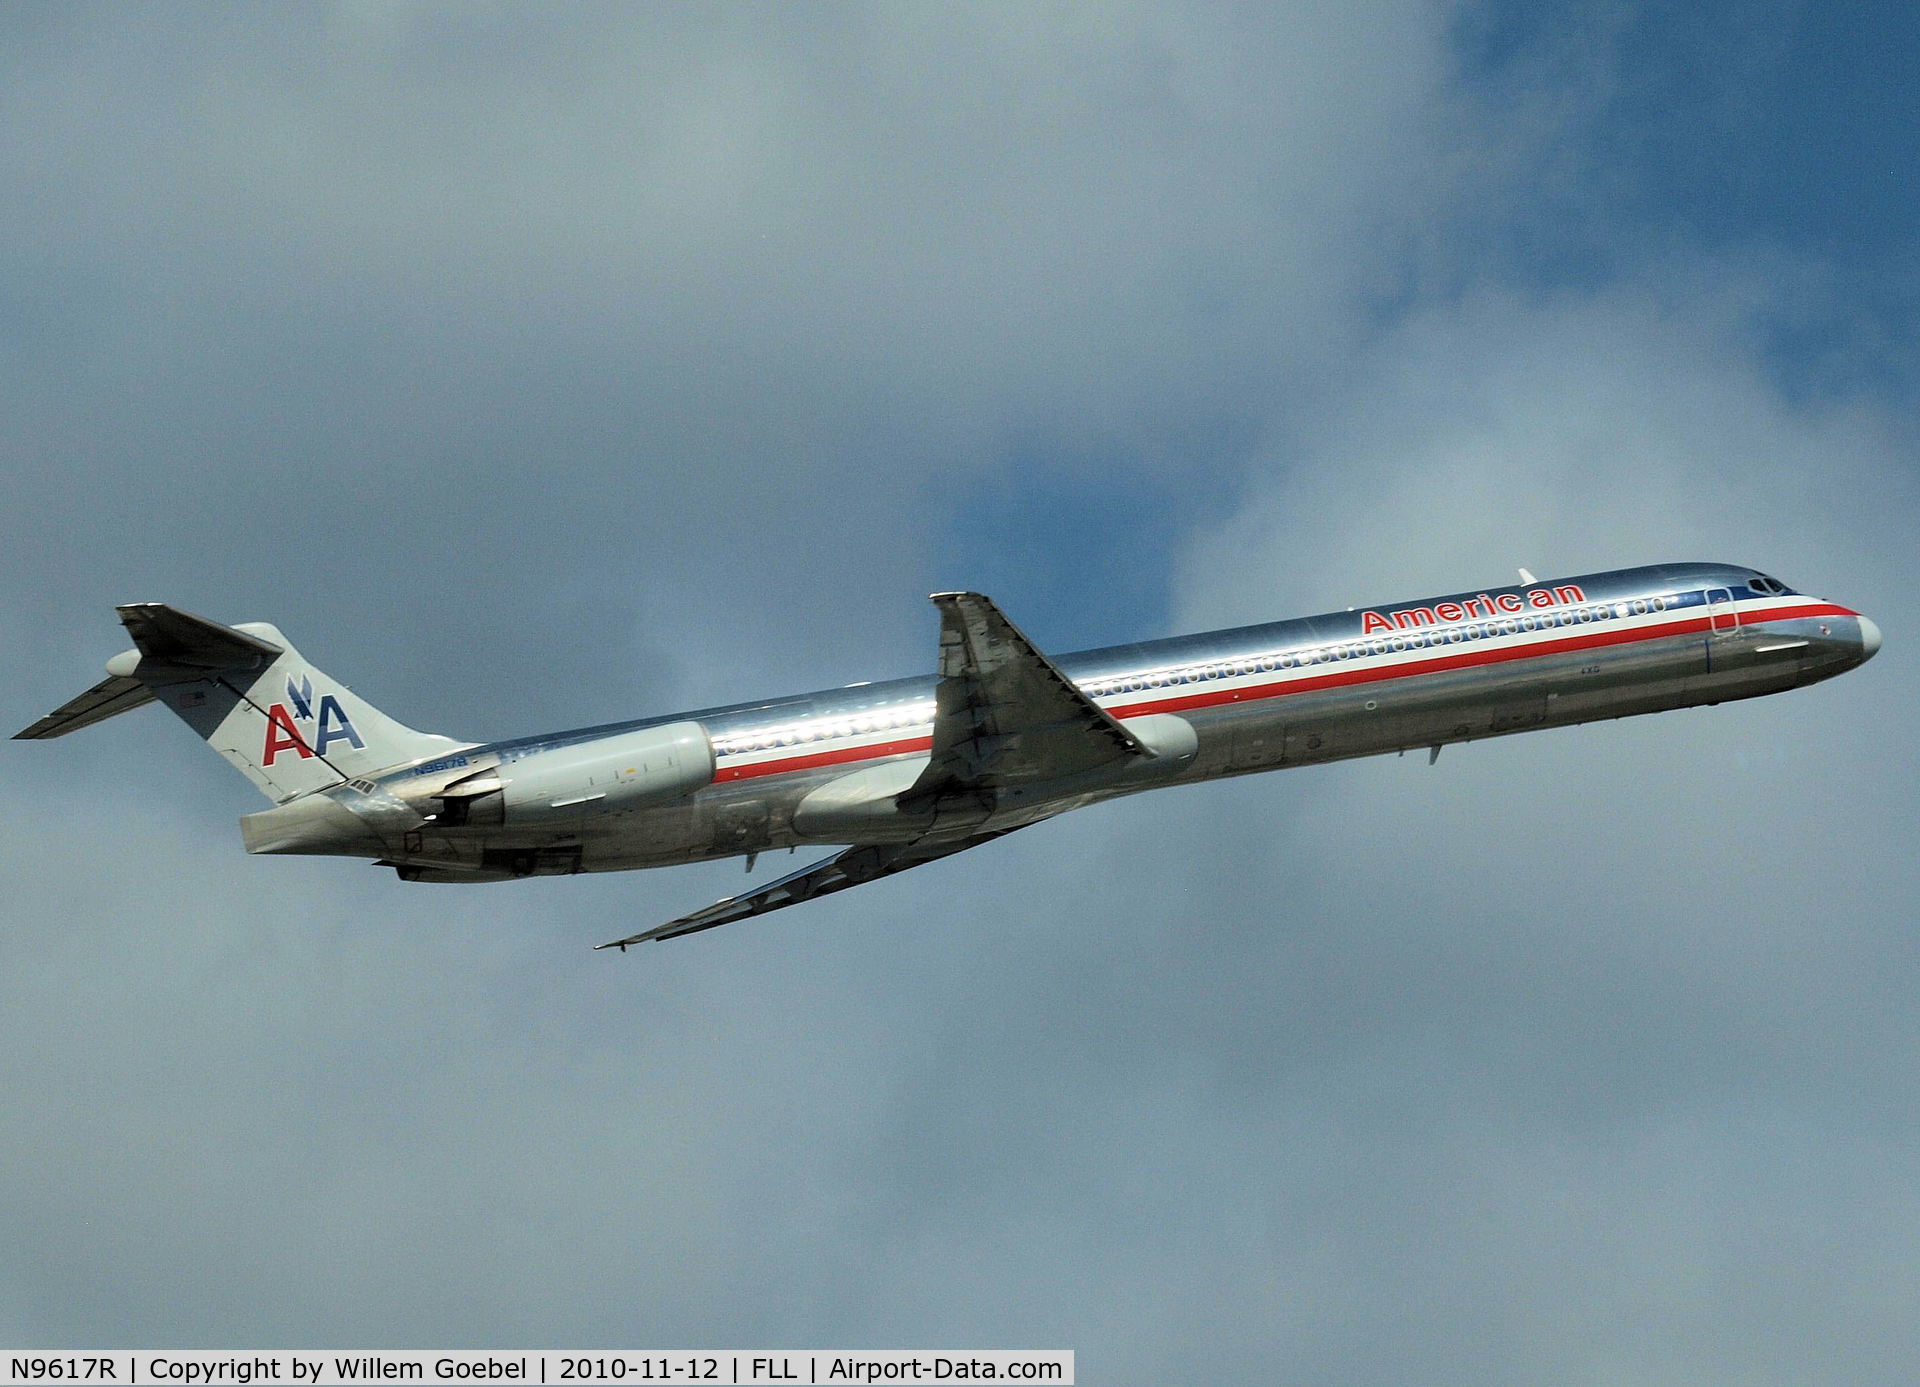 N9617R, 1997 McDonnell Douglas MD-83 (DC-9-83) C/N 53564, Take off from Frt Lauderdale